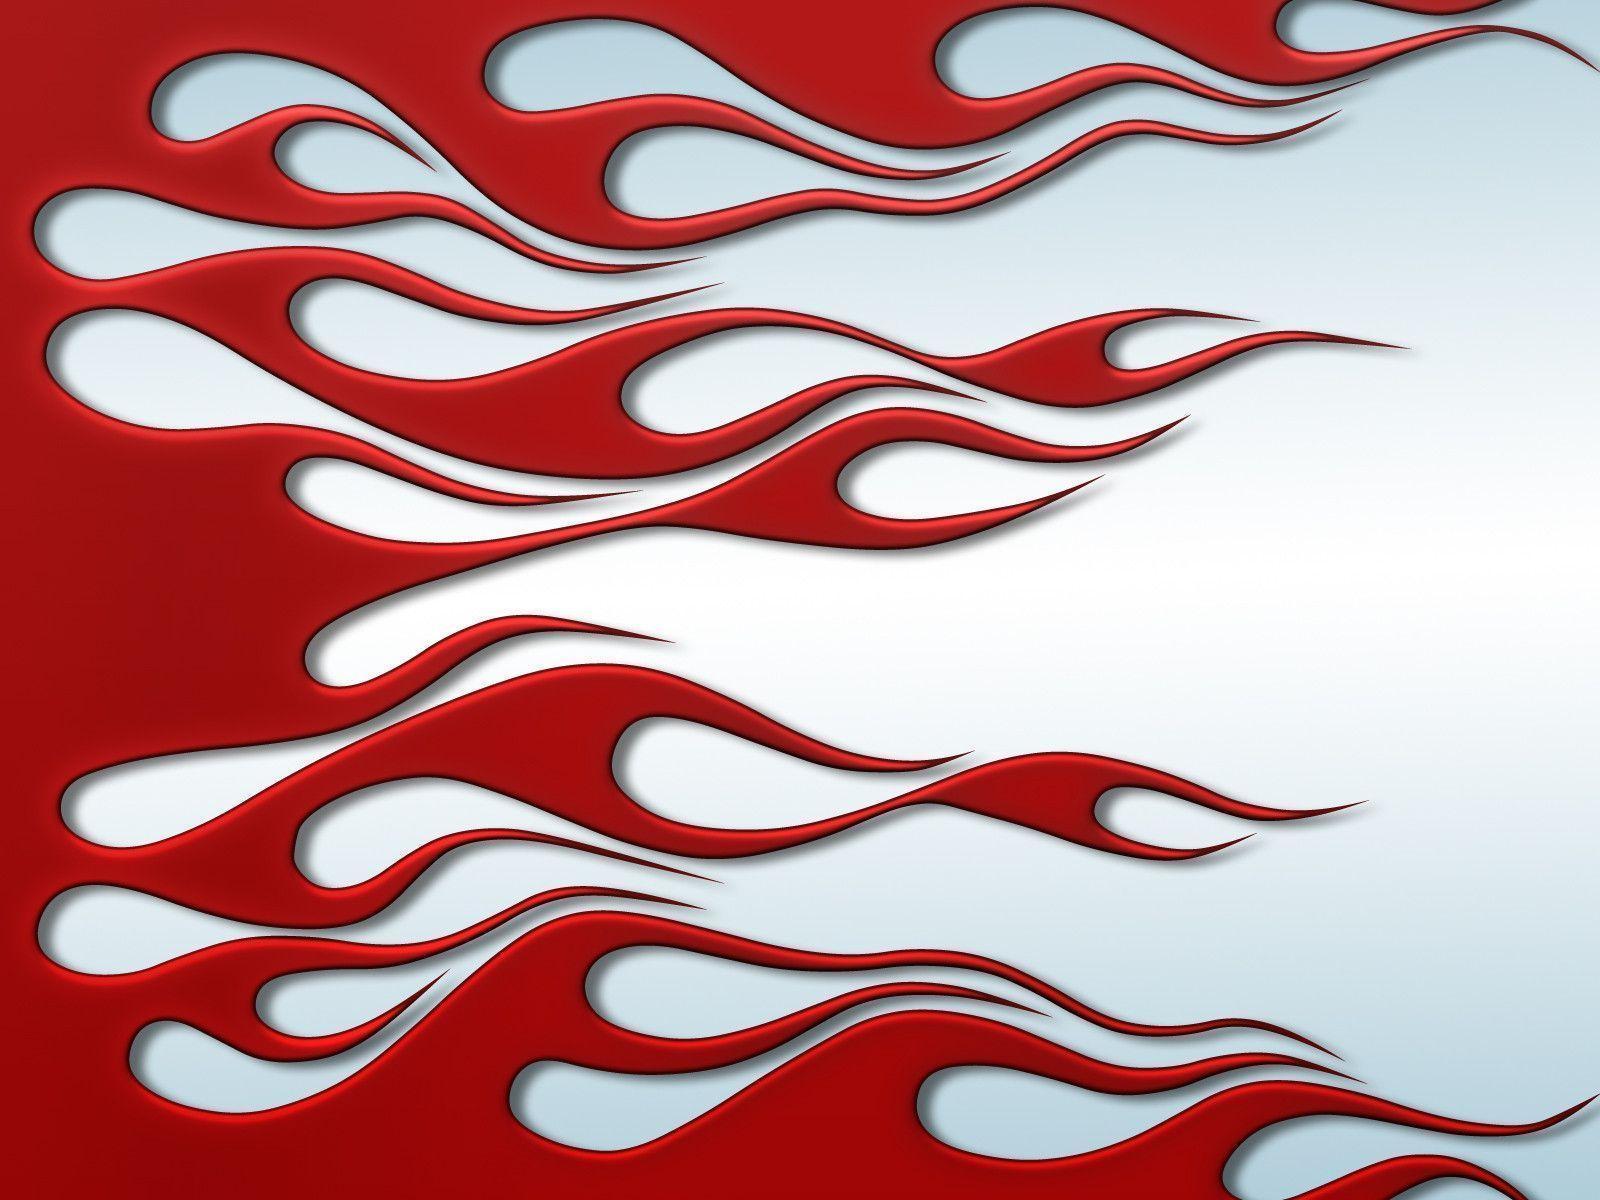 Flames Red On White PPT Background for Presentation